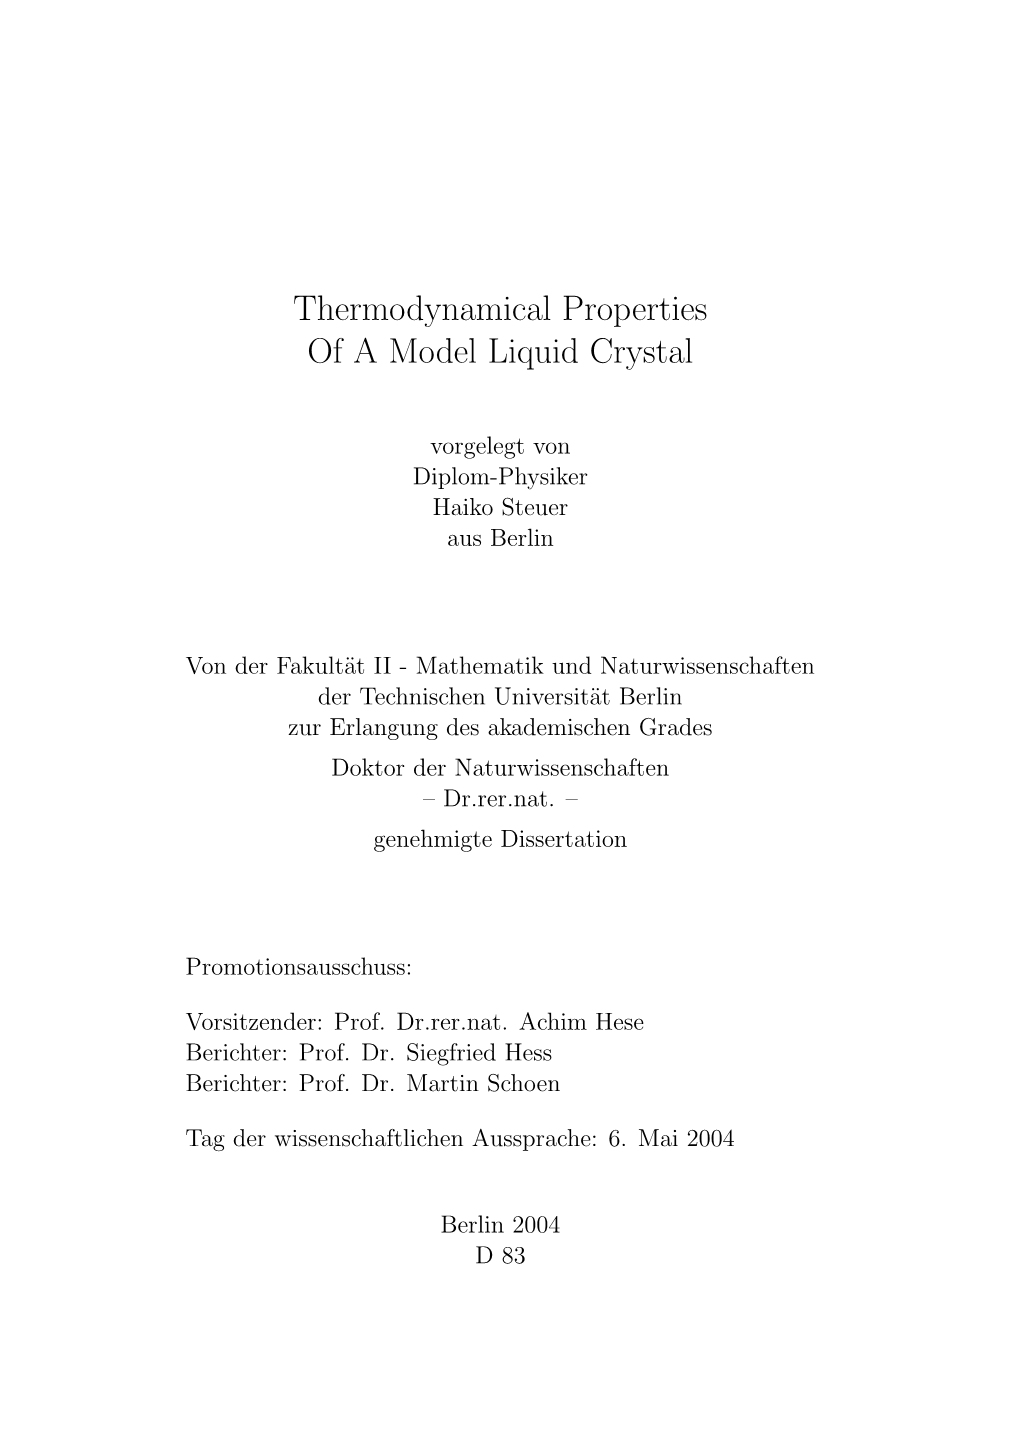 Thermodynamical Properties of a Model Liquid Crystal